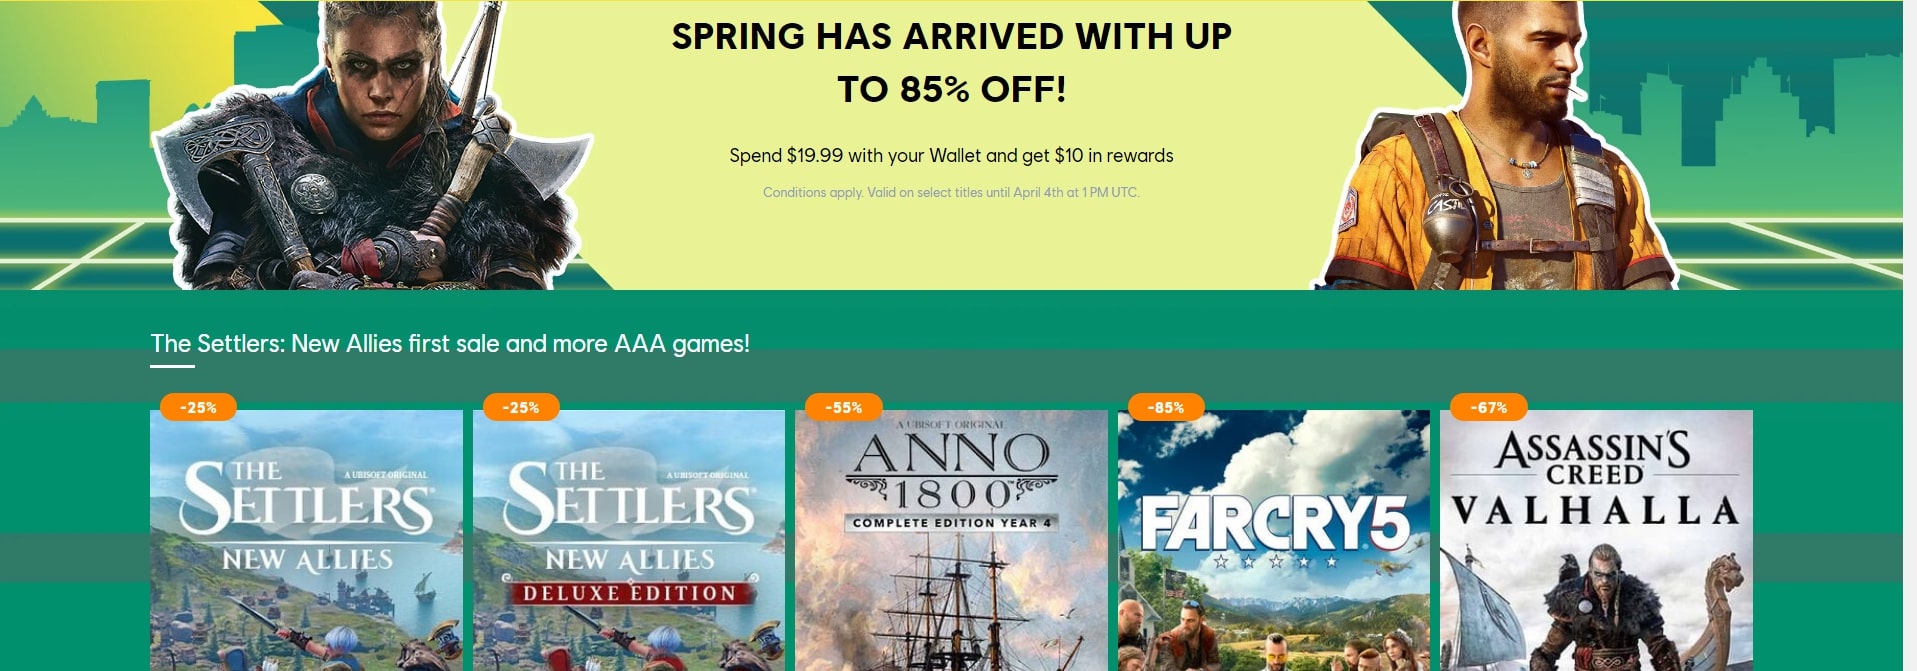 The Spring Sale Offers on the Ubisoft Store